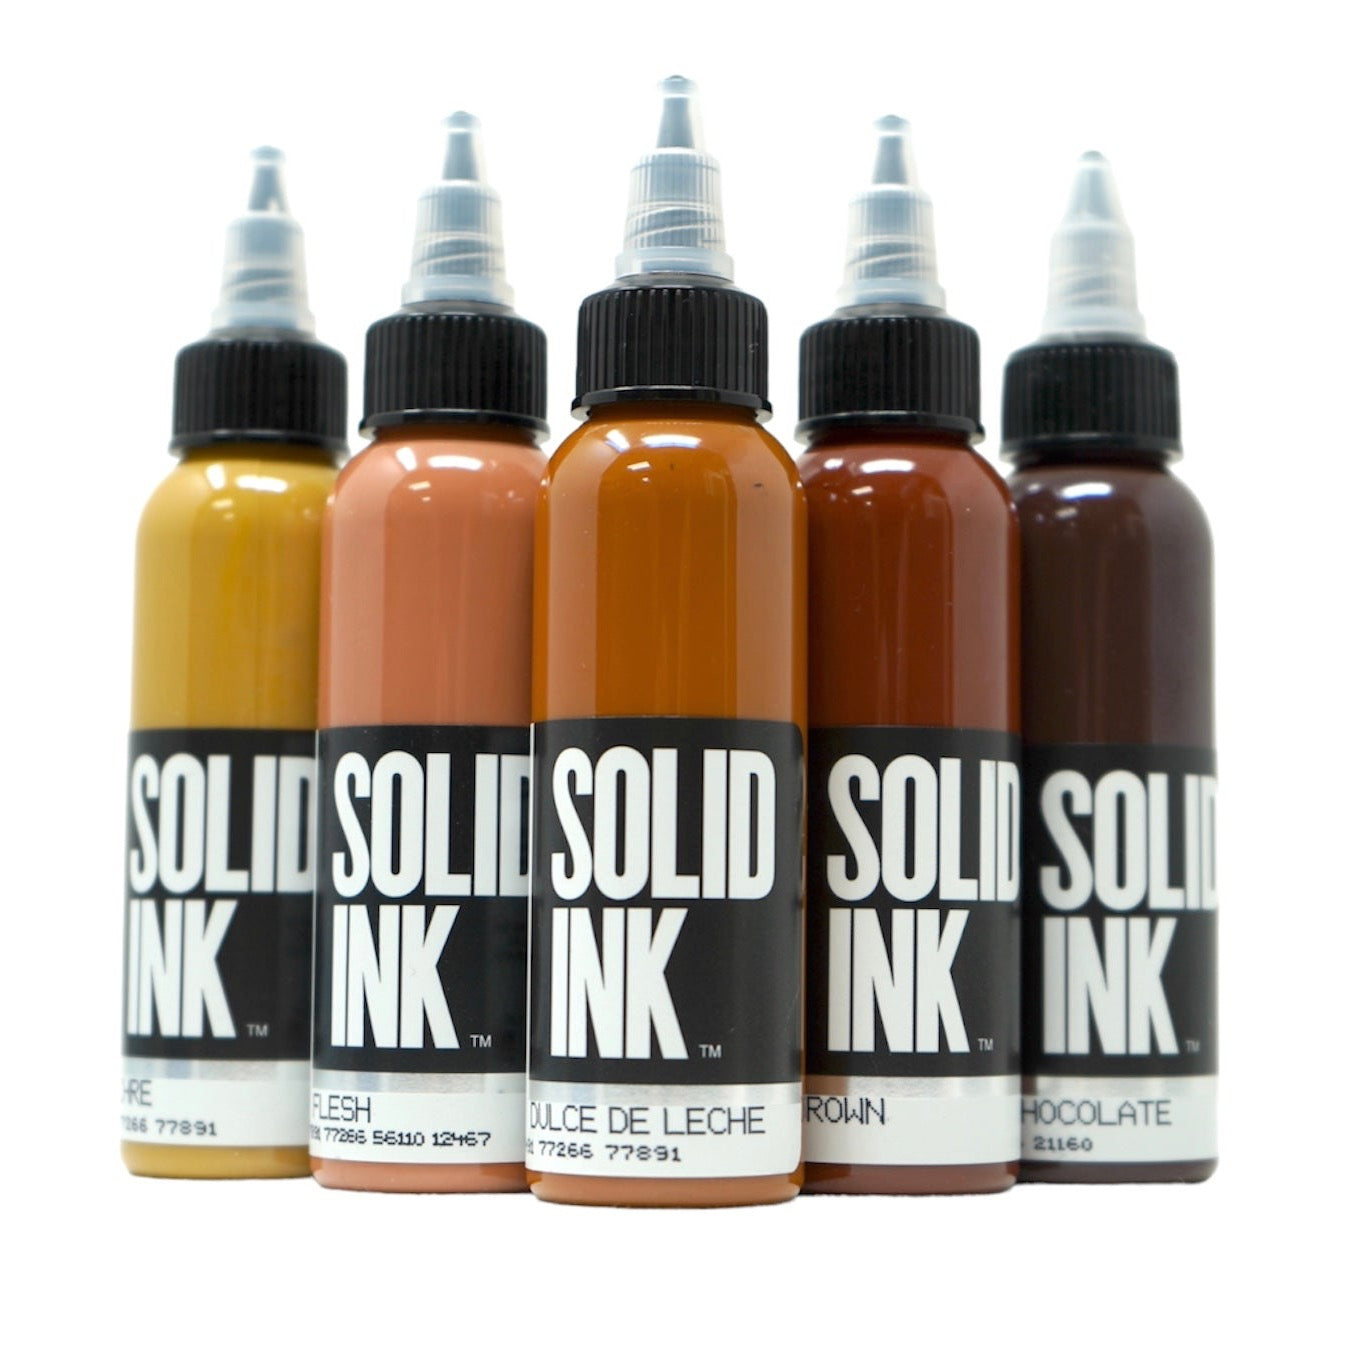 Solid 25 Color Tattoo Ink Set For Sale In-store & Online - Beacon